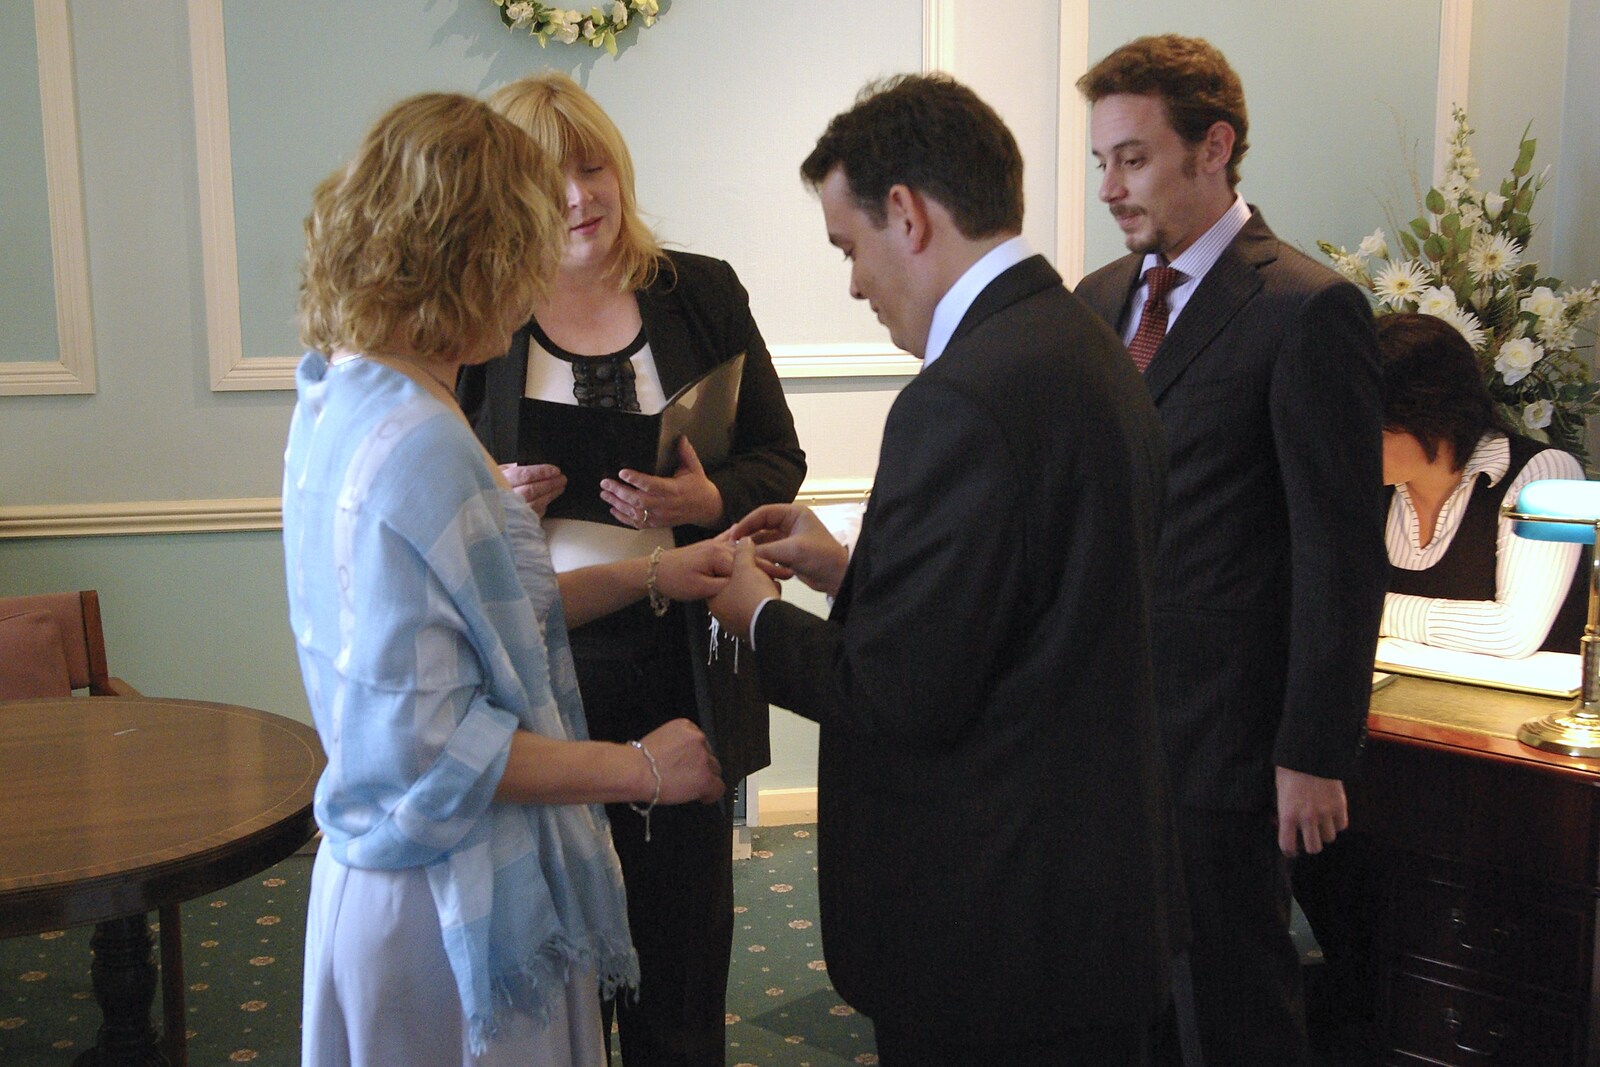 Hani and Anne's Wedding, County Hall, Cambridge - 2nd May 2008: The ring thing is done